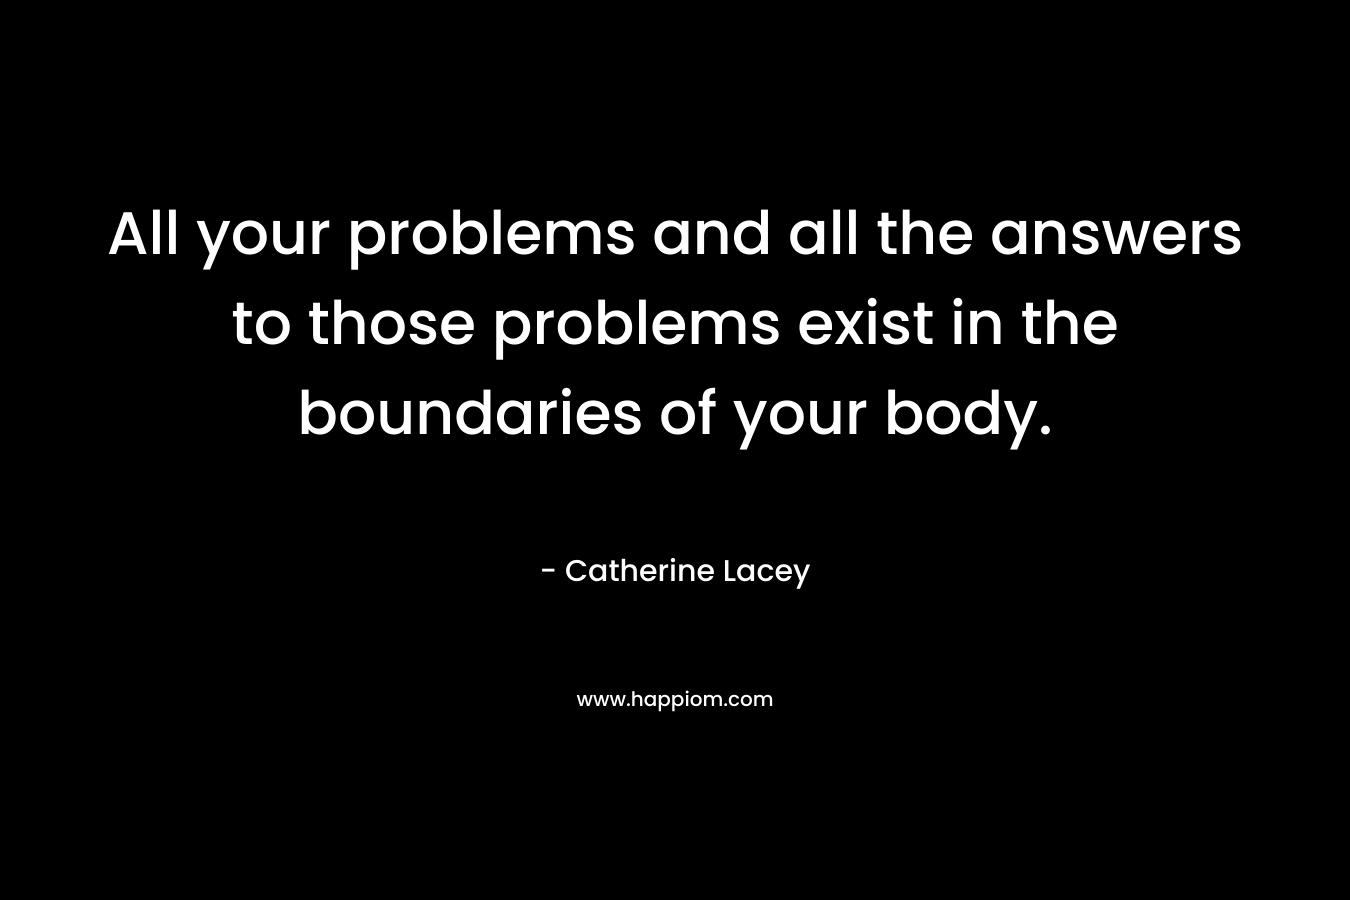 All your problems and all the answers to those problems exist in the boundaries of your body. – Catherine Lacey